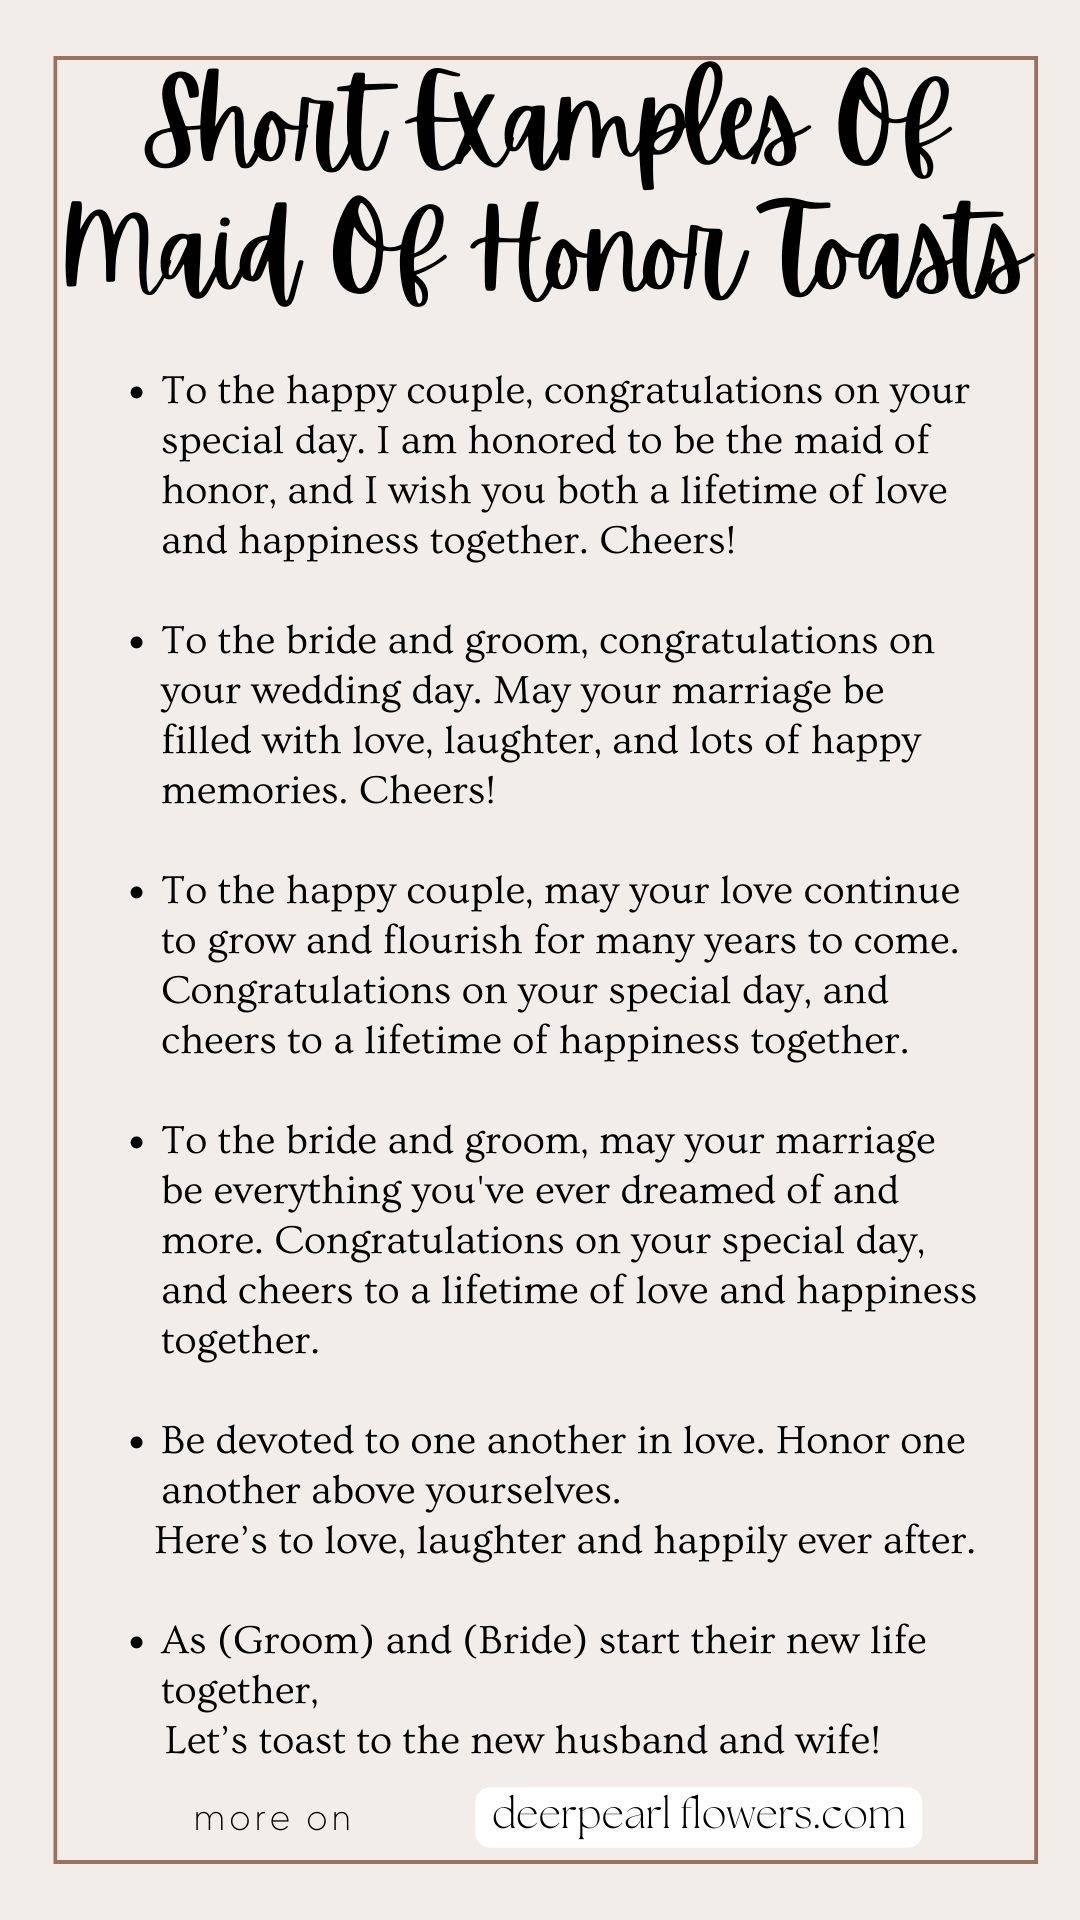 Short Examples Of Maid Of Honor Toasts